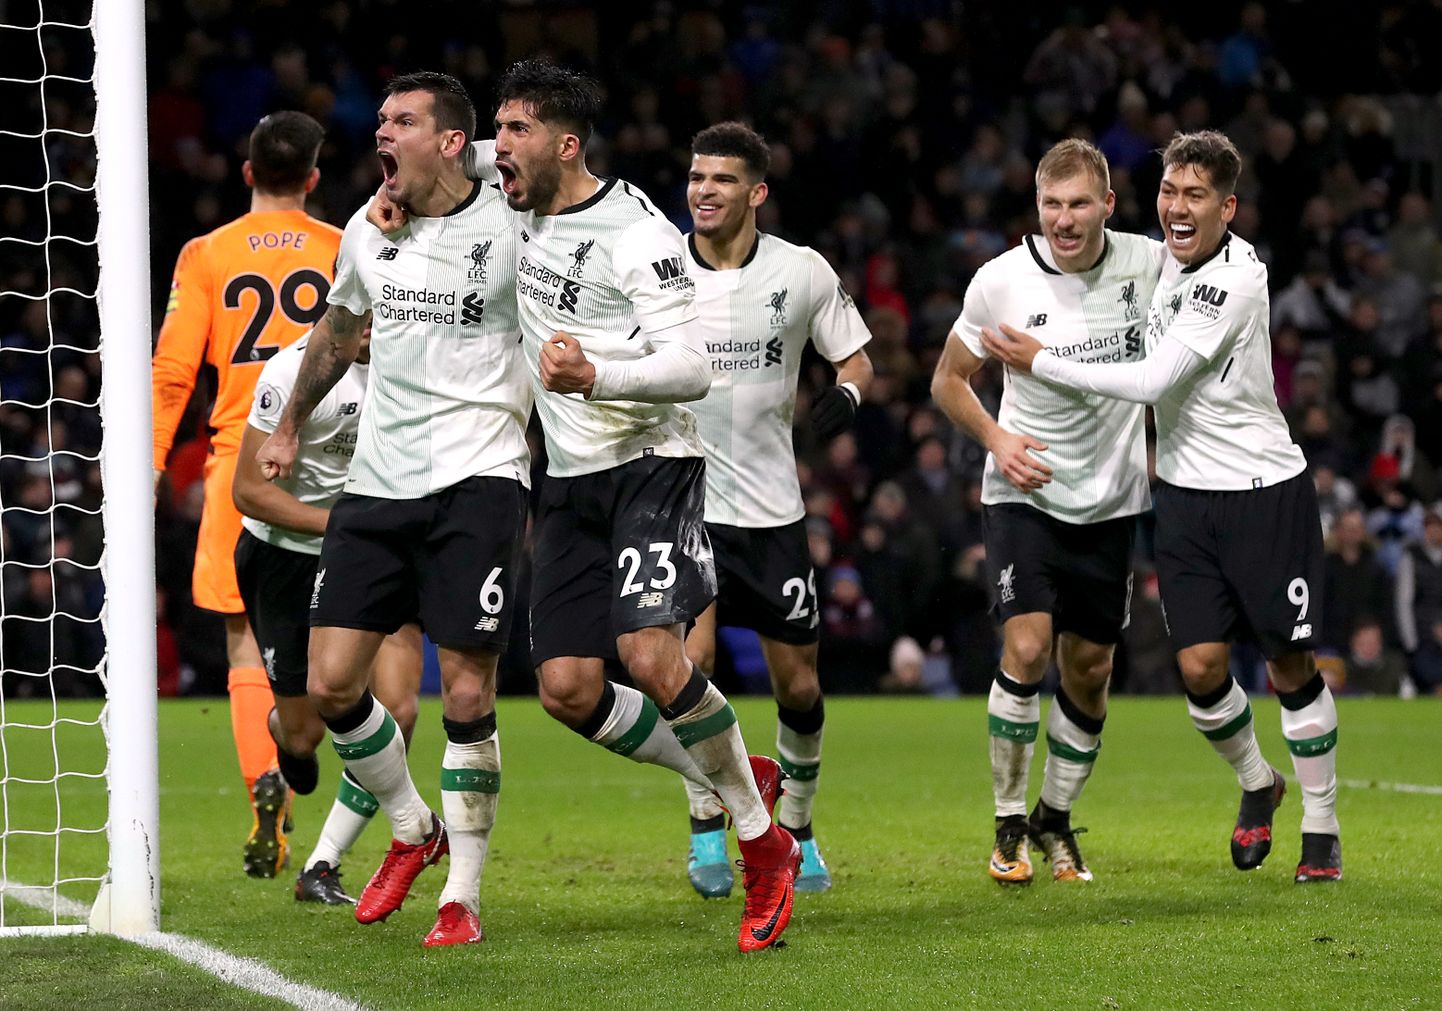 Liverpool's Dejan Lovren (left) and Liverpool's Emre Can (second left) celebrate after Liverpool's Ragnar Klavan (second right) scores his side's second goal of the game during the Premier League match at Turf Moor, Burnley.